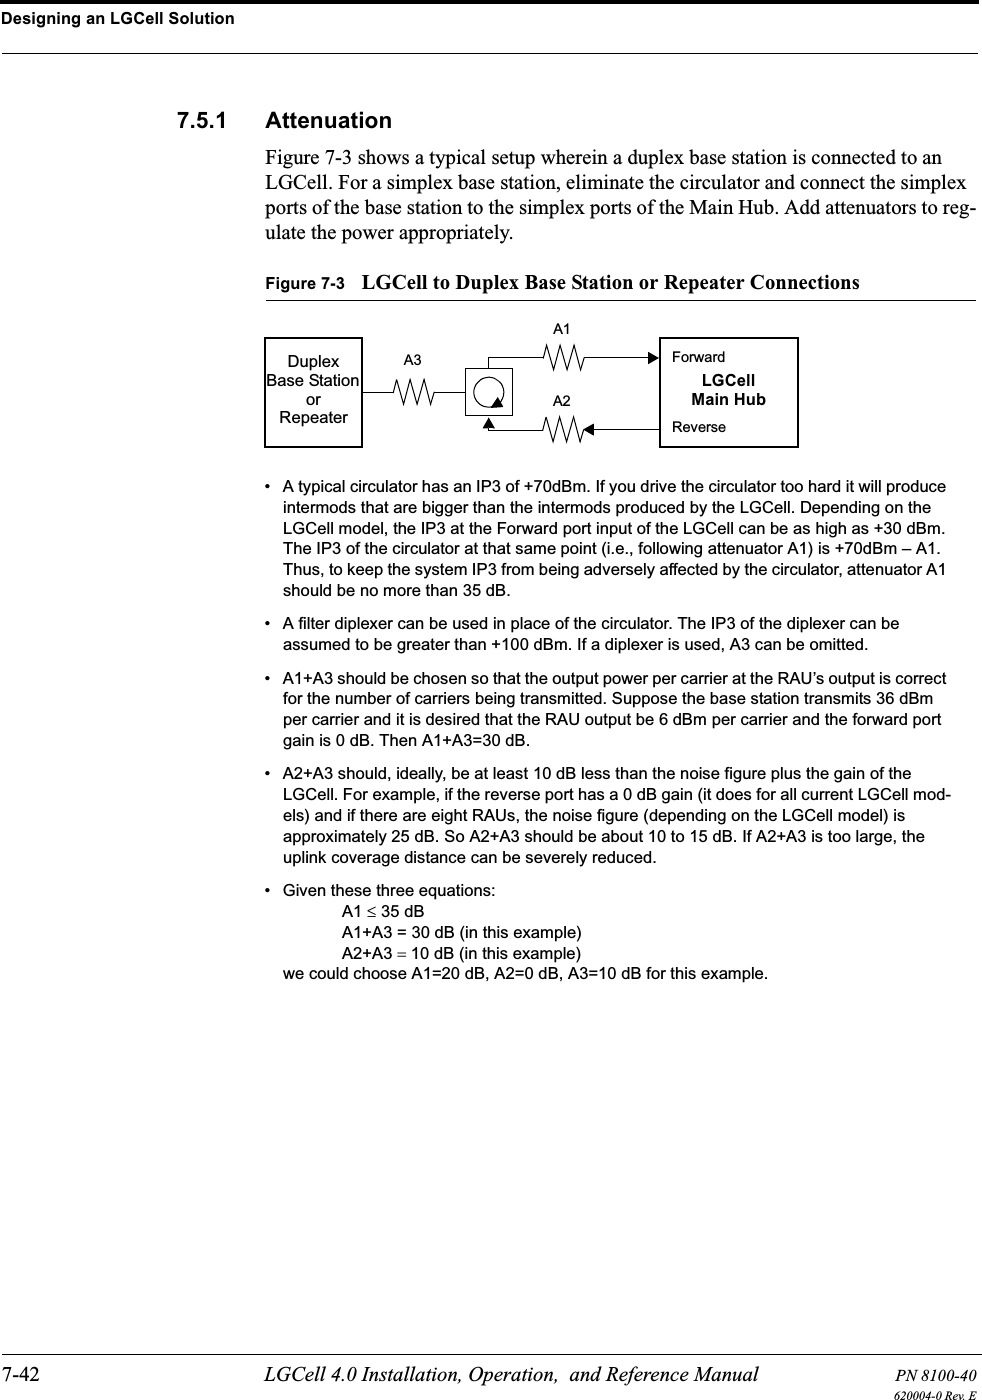 Designing an LGCell Solution7-42 LGCell 4.0 Installation, Operation,  and Reference Manual PN 8100-40620004-0 Rev. E7.5.1 AttenuationFigure 7-3 shows a typical setup wherein a duplex base station is connected to an LGCell. For a simplex base station, eliminate the circulator and connect the simplex ports of the base station to the simplex ports of the Main Hub. Add attenuators to reg-ulate the power appropriately.Figure 7-3 LGCell to Duplex Base Station or Repeater ConnectionsDuplexBase Station LGCellMain HubForwardReverseA3A1A2• A typical circulator has an IP3 of +70dBm. If you drive the circulator too hard it will produce intermods that are bigger than the intermods produced by the LGCell. Depending on the LGCell model, the IP3 at the Forward port input of the LGCell can be as high as +30 dBm. The IP3 of the circulator at that same point (i.e., following attenuator A1) is +70dBm – A1. Thus, to keep the system IP3 from being adversely affected by the circulator, attenuator A1 should be no more than 35 dB.• A filter diplexer can be used in place of the circulator. The IP3 of the diplexer can be assumed to be greater than +100 dBm. If a diplexer is used, A3 can be omitted.• A1+A3 should be chosen so that the output power per carrier at the RAU’s output is correct for the number of carriers being transmitted. Suppose the base station transmits 36 dBm per carrier and it is desired that the RAU output be 6 dBm per carrier and the forward port gain is 0 dB. Then A1+A3=30 dB.• A2+A3 should, ideally, be at least 10 dB less than the noise figure plus the gain of the LGCell. For example, if the reverse port has a 0 dB gain (it does for all current LGCell mod-els) and if there are eight RAUs, the noise figure (depending on the LGCell model) is approximately 25 dB. So A2+A3 should be about 10 to 15 dB. If A2+A3 is too large, the uplink coverage distance can be severely reduced.• Given these three equations: A1 ≤ 35 dBA1+A3 = 30 dB (in this example)A2+A3 = 10 dB (in this example)we could choose A1=20 dB, A2=0 dB, A3=10 dB for this example.orRepeater